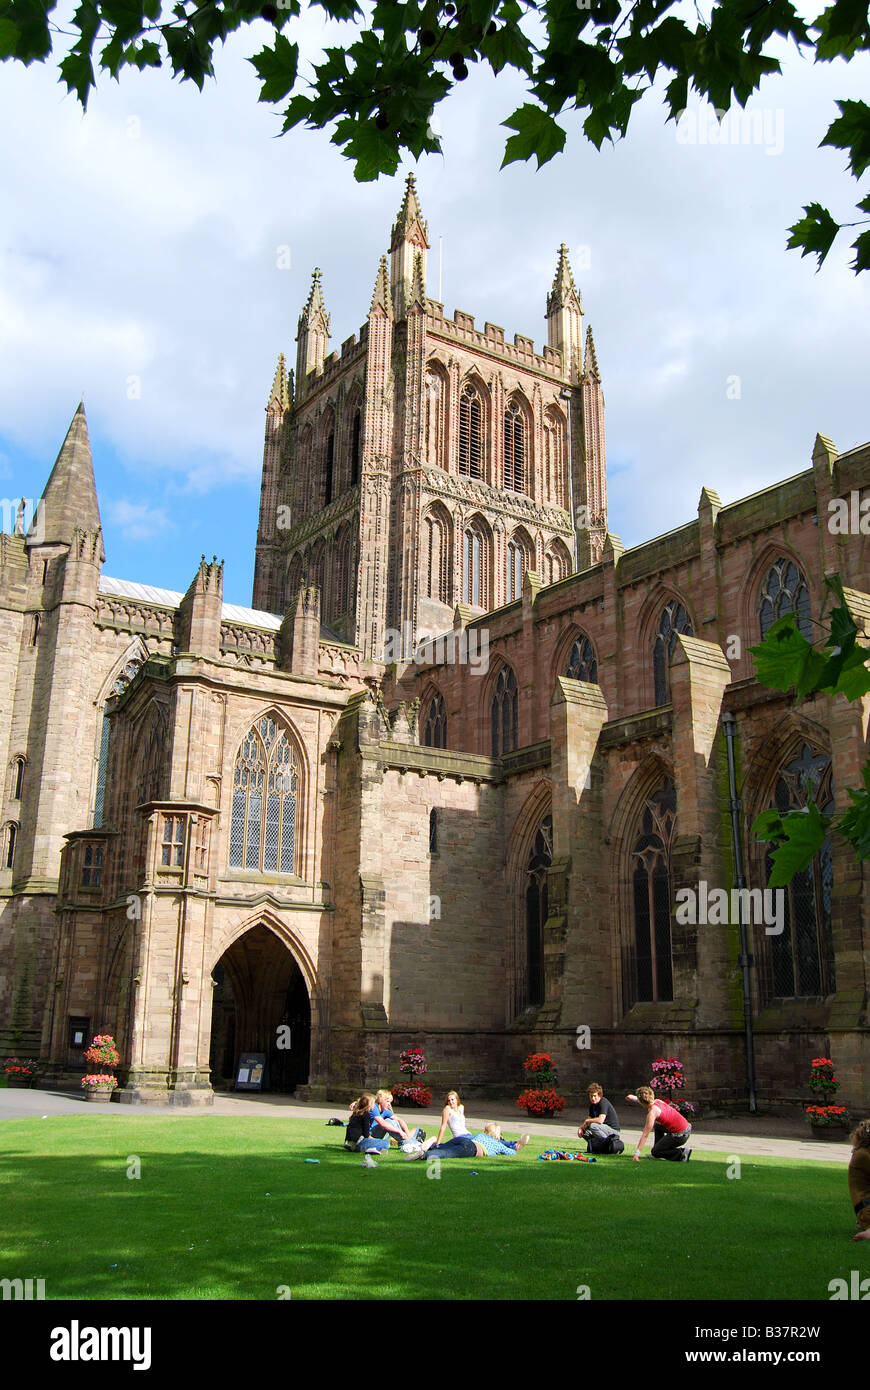 Hereford Cathedral, Hereford, Herefordshire, England, United Kingdom Stock Photo